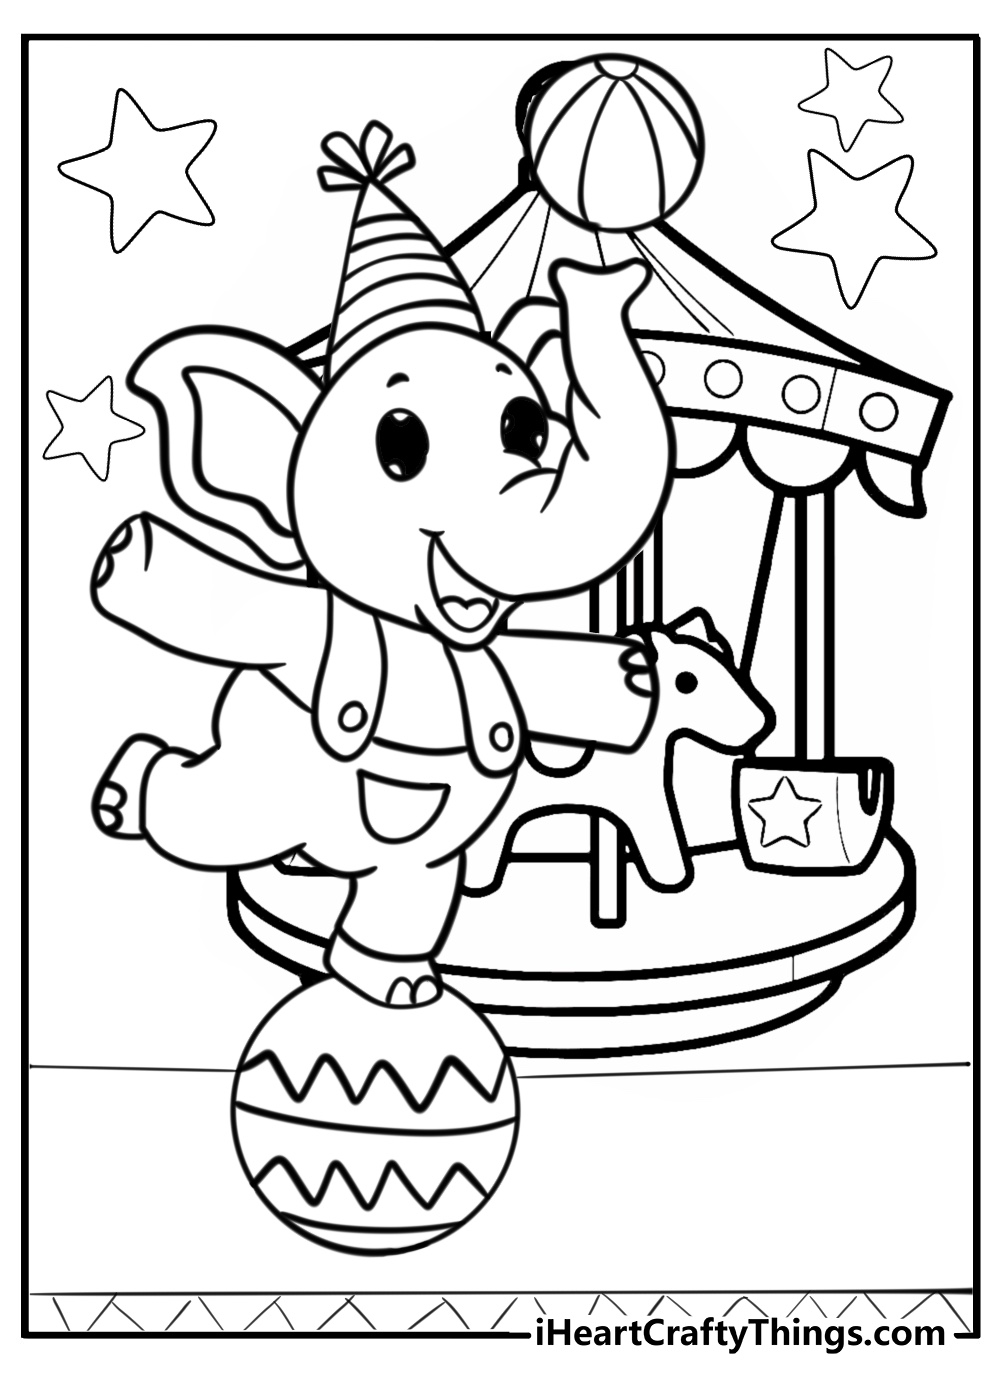 Circus coloring page of large elephant on top of a ball